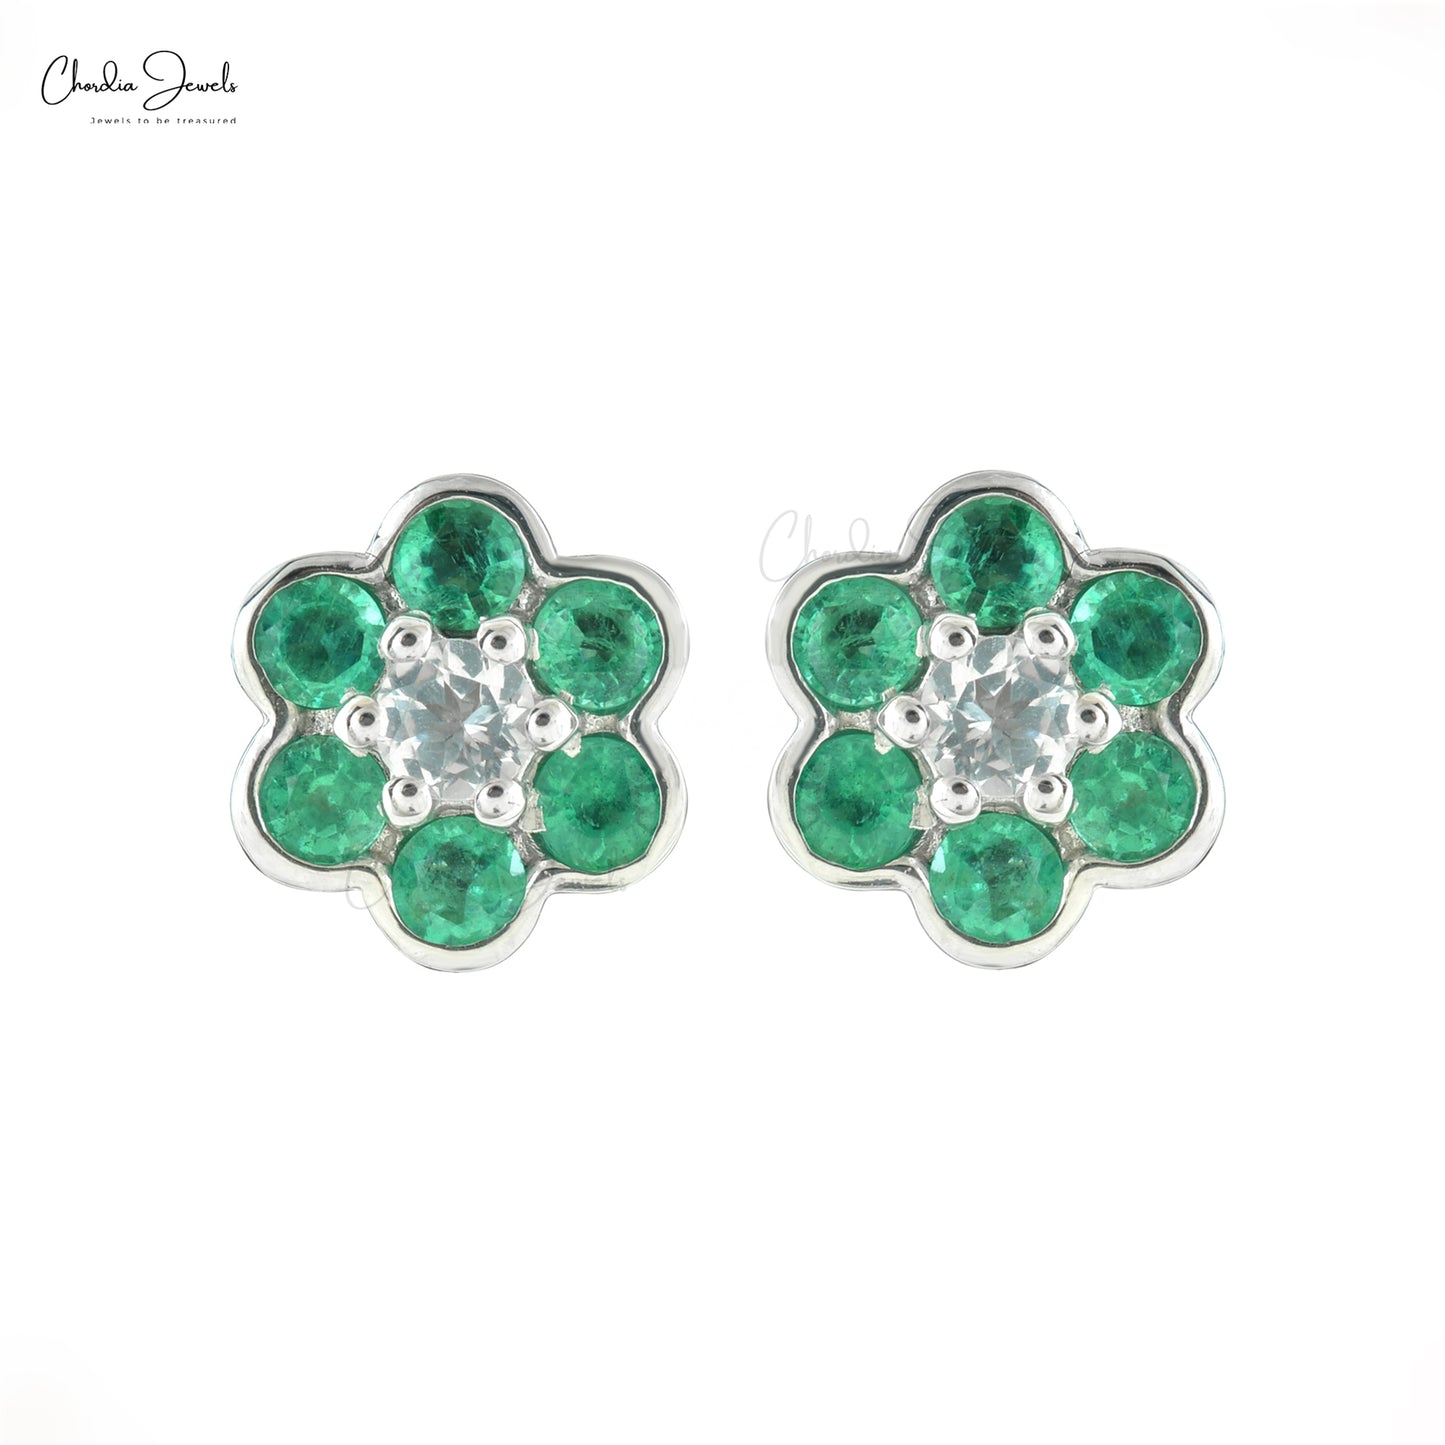 Load image into Gallery viewer, Natural Zambia Emerald Earrings 14k Solid White Gold Topaz Earrings 0.36Cts Round Cut Gemstone Minimal Earrings For Women&amp;#39;s
